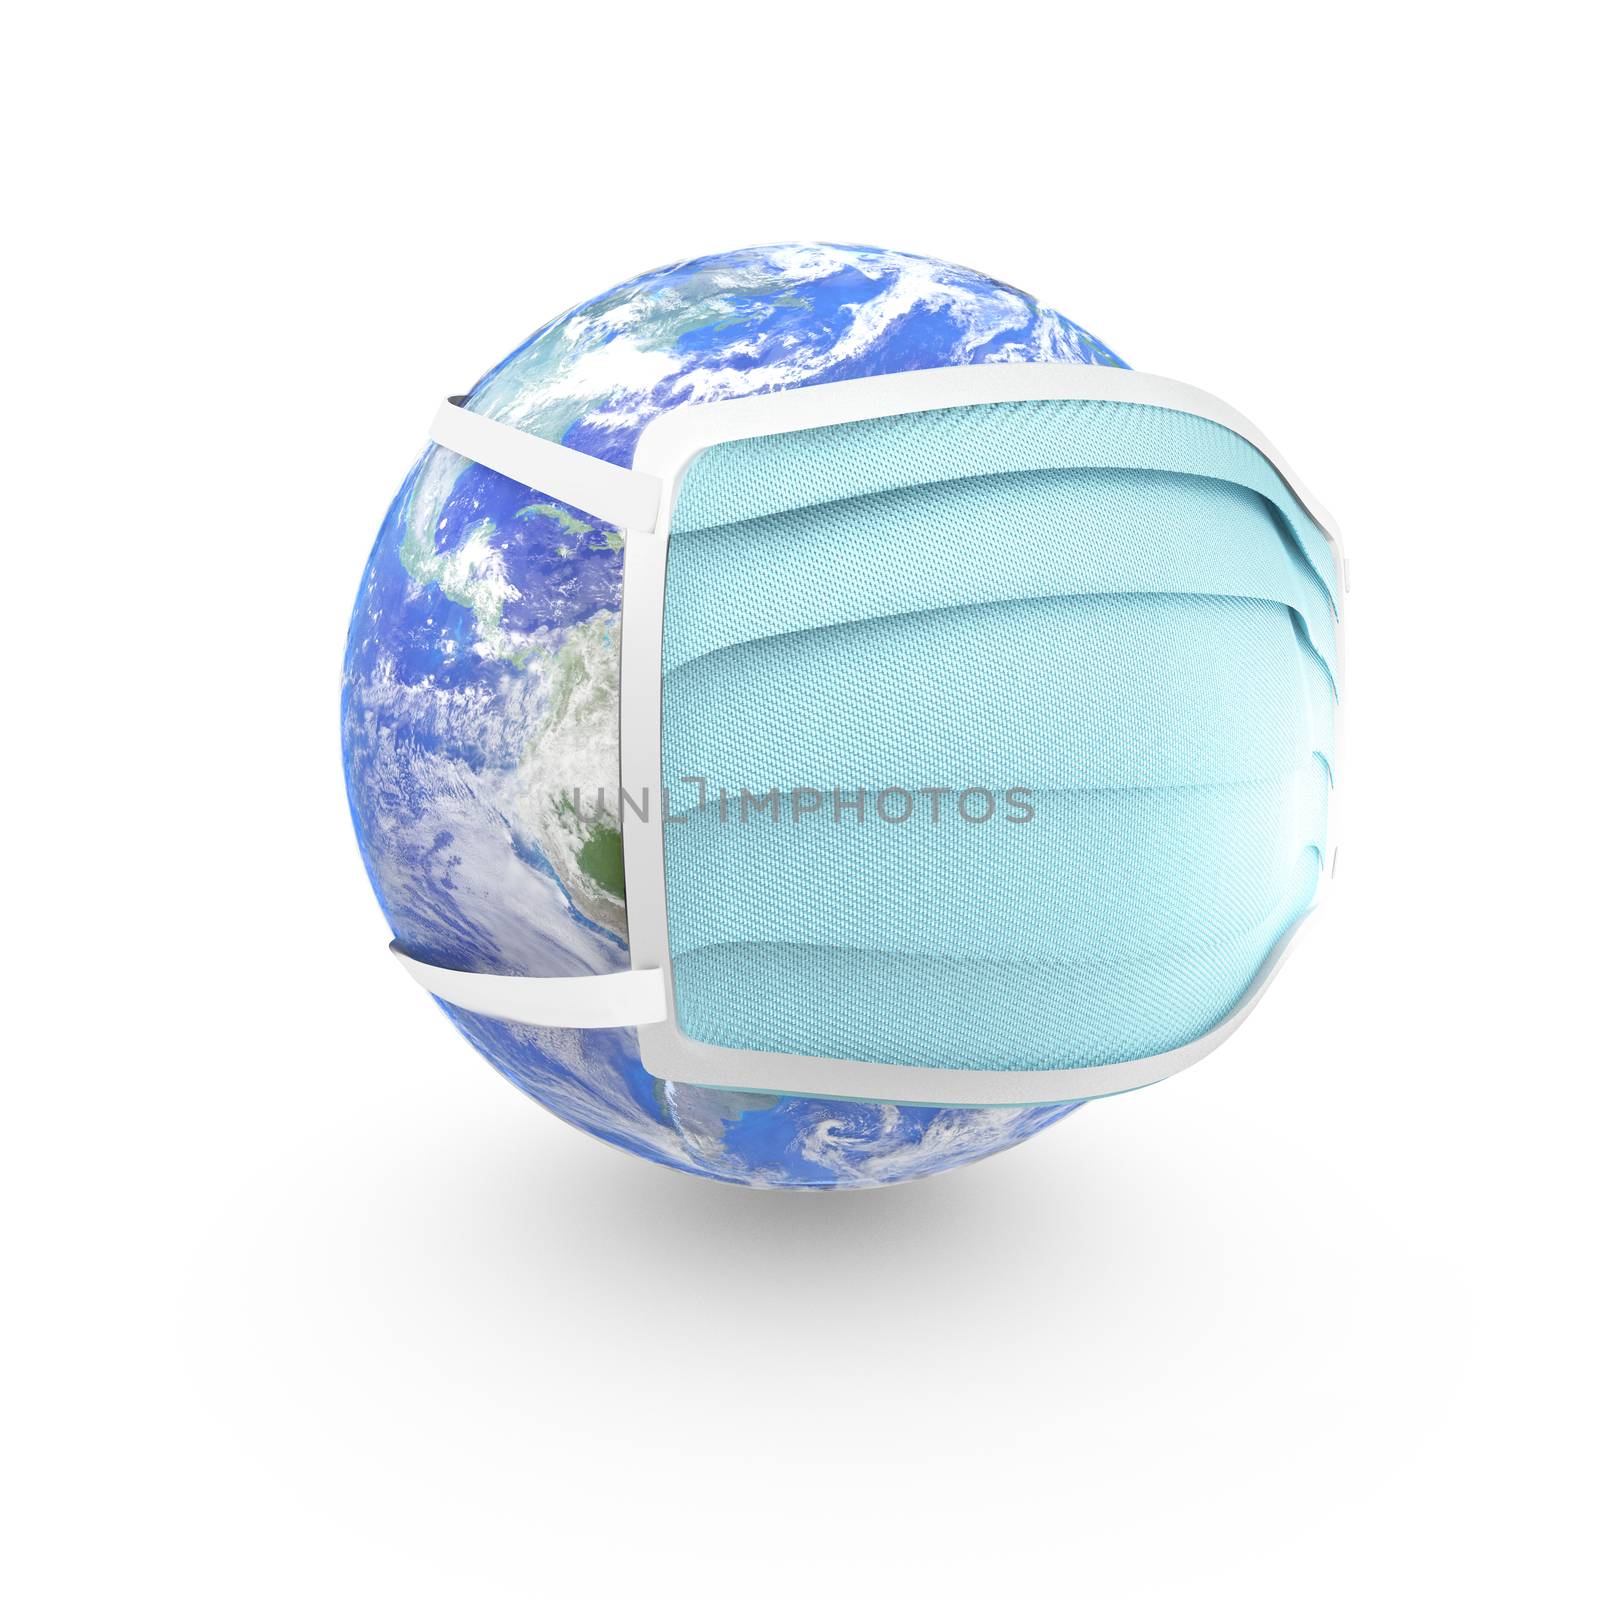 Concept illustration of world wearing a protectice face mask. 3D Rendering